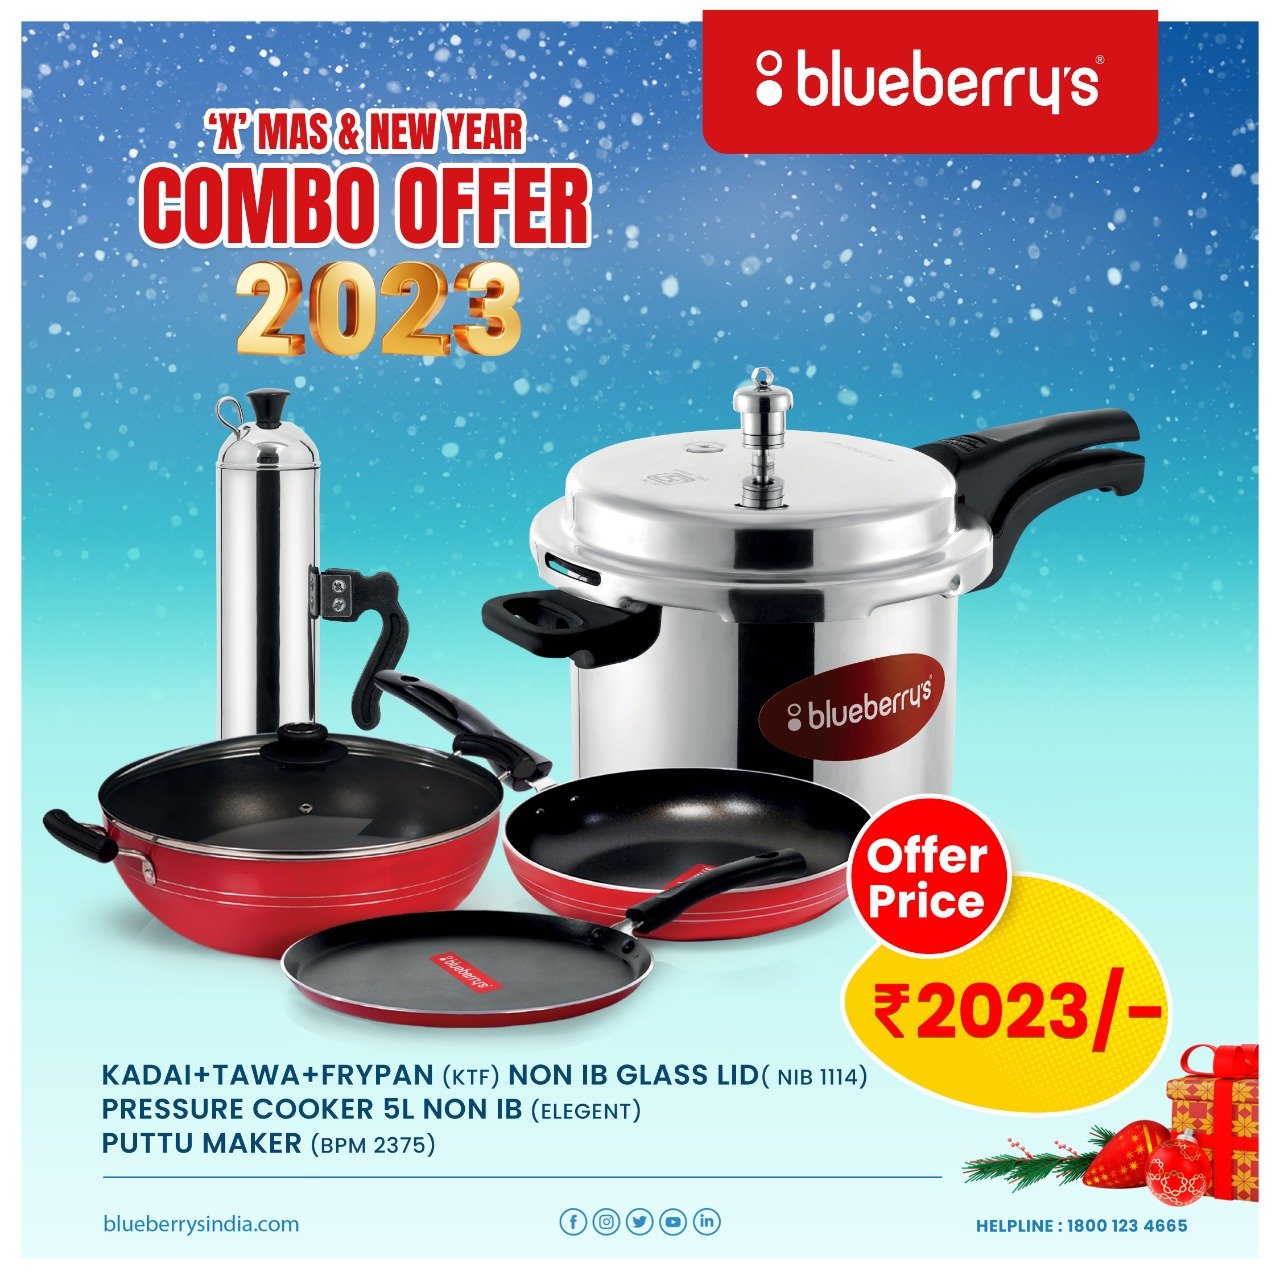 Buy Blueberry's 5in1 'X' Mas & New Year Combo Offer, Made in India